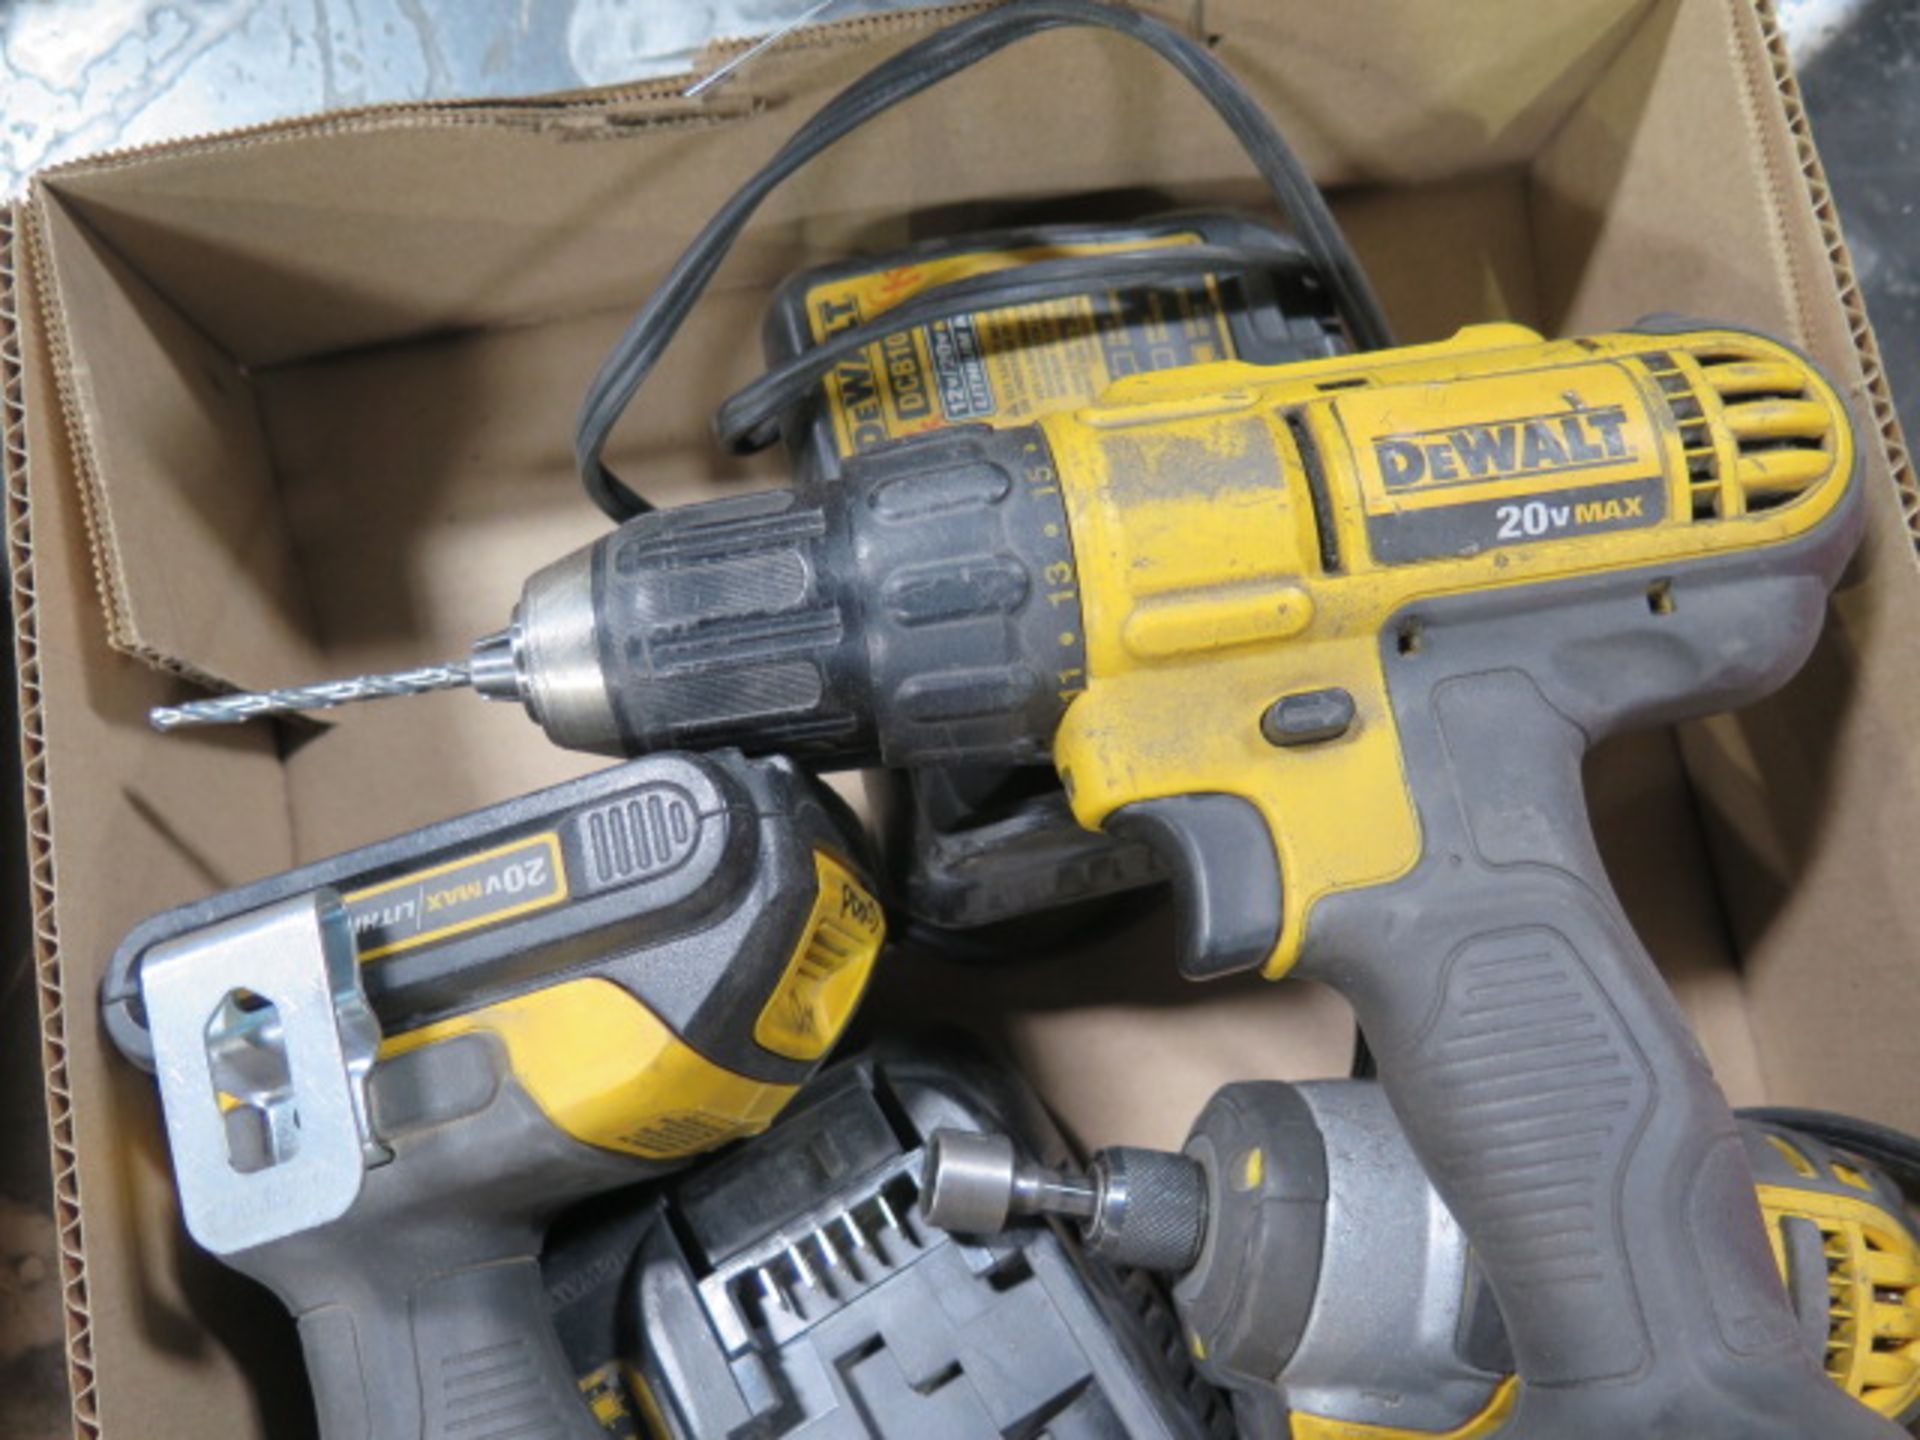 DeWalt 20 Volt Cordless Drills and Nut Drivers w/ Charger (SOLD AS-IS - NO WARRANTY) - Image 4 of 4